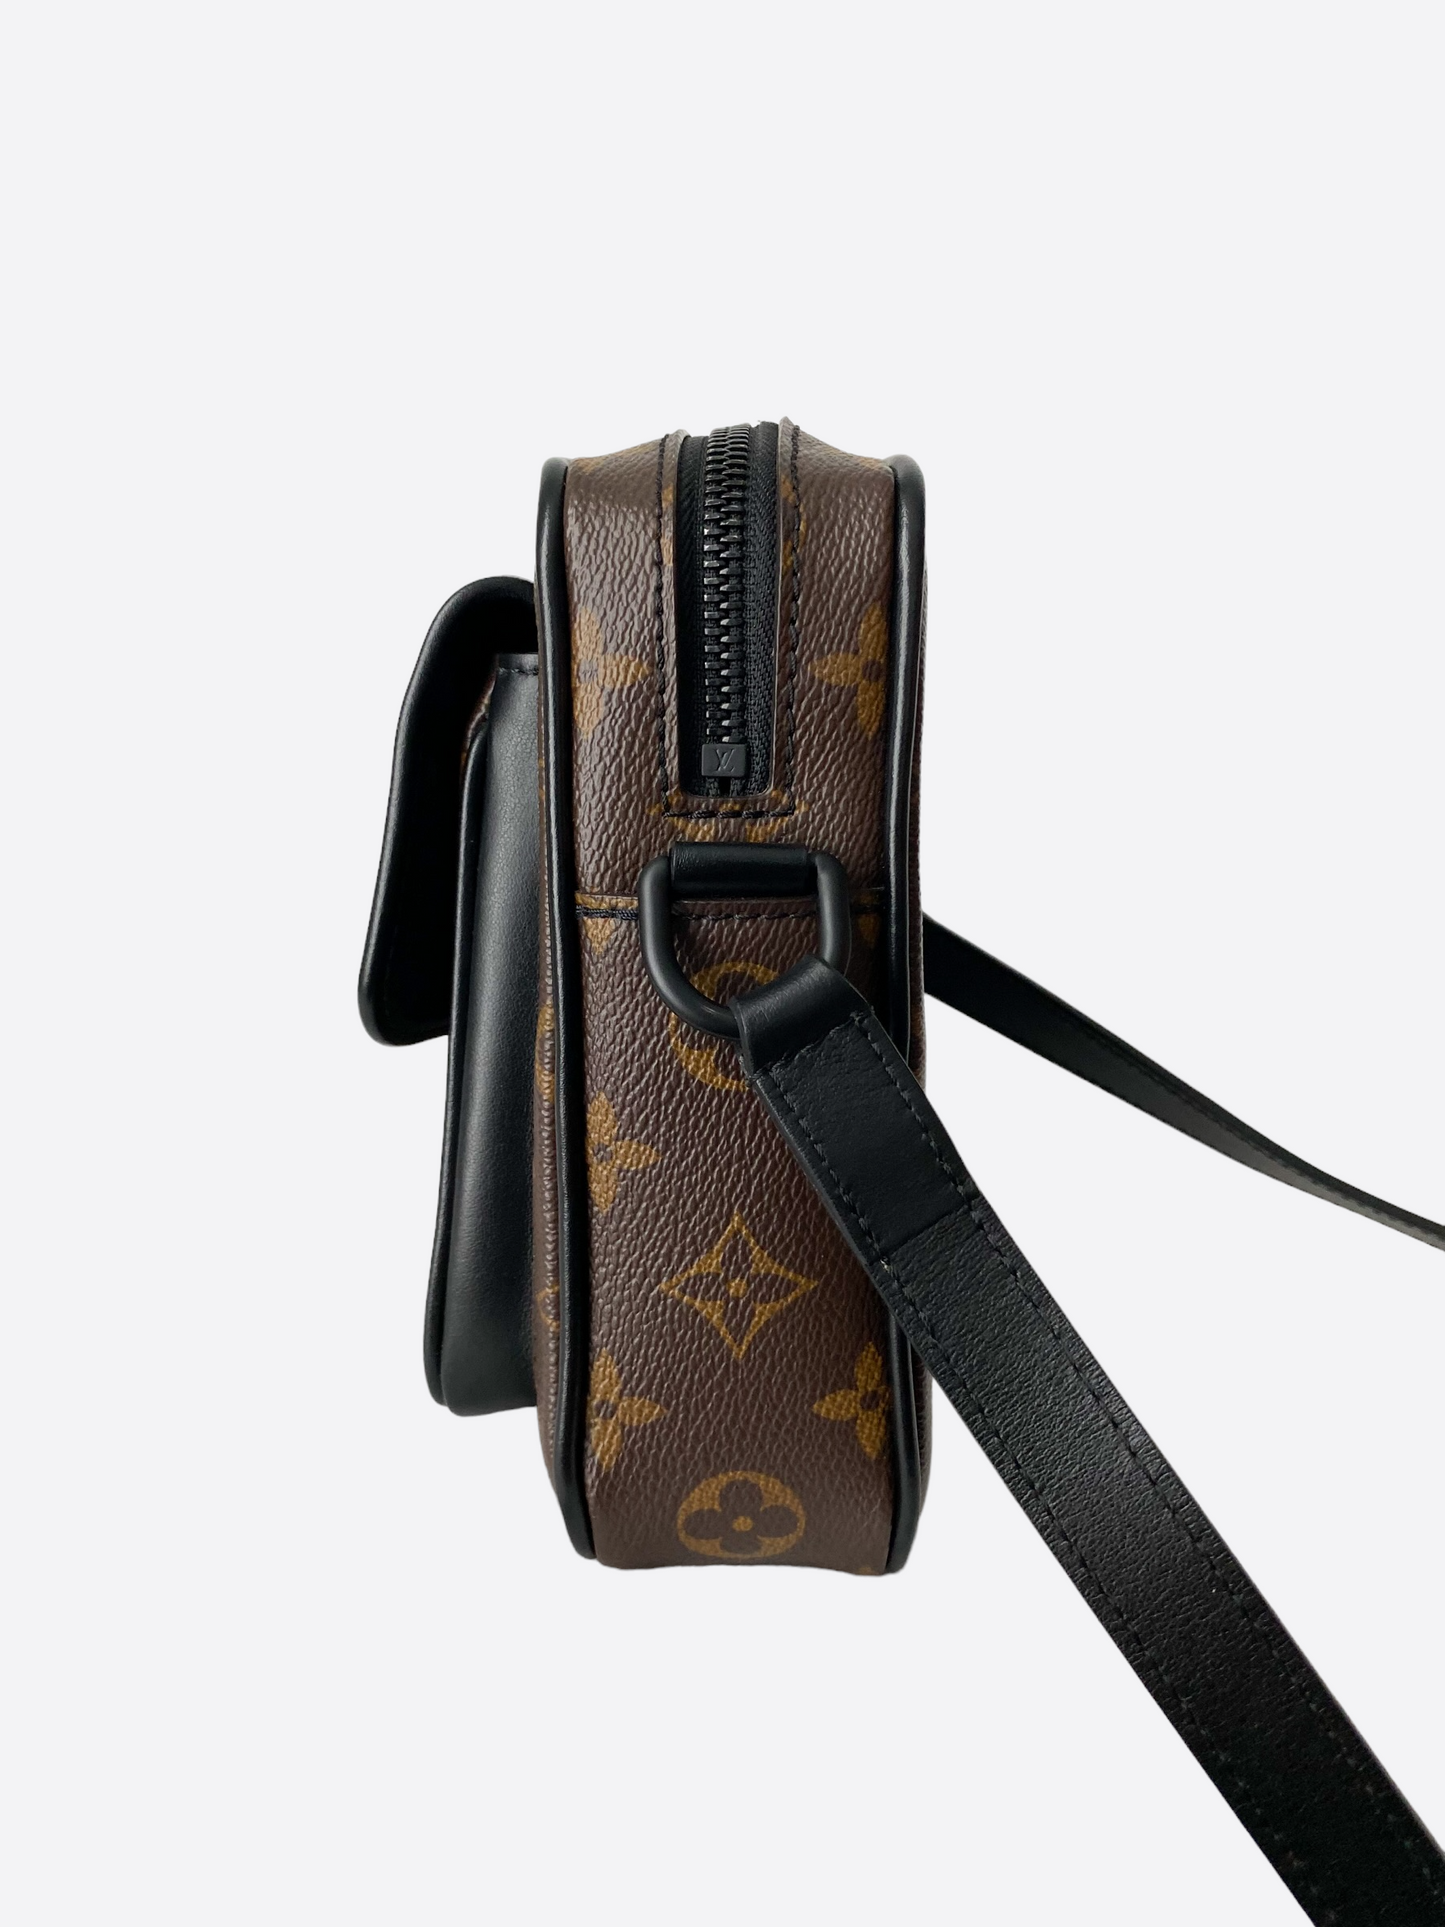 Christopher wearable wallet leather bag Louis Vuitton Brown in